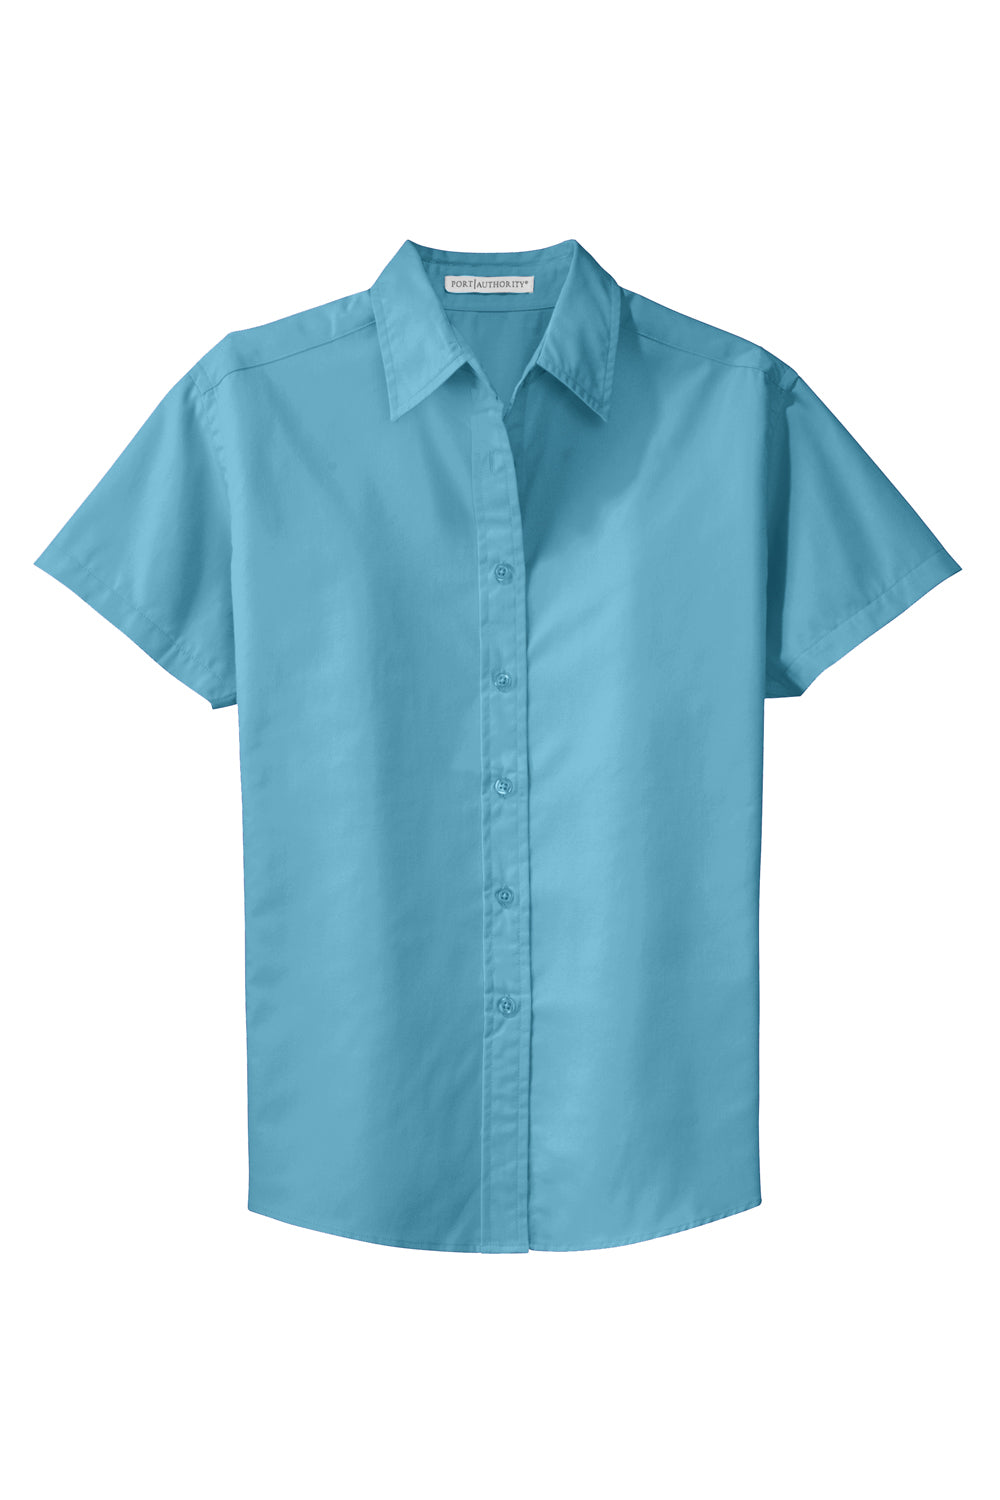 Port Authority L508 Womens Easy Care Wrinkle Resistant Short Sleeve Button Down Shirt Maui Blue Flat Front